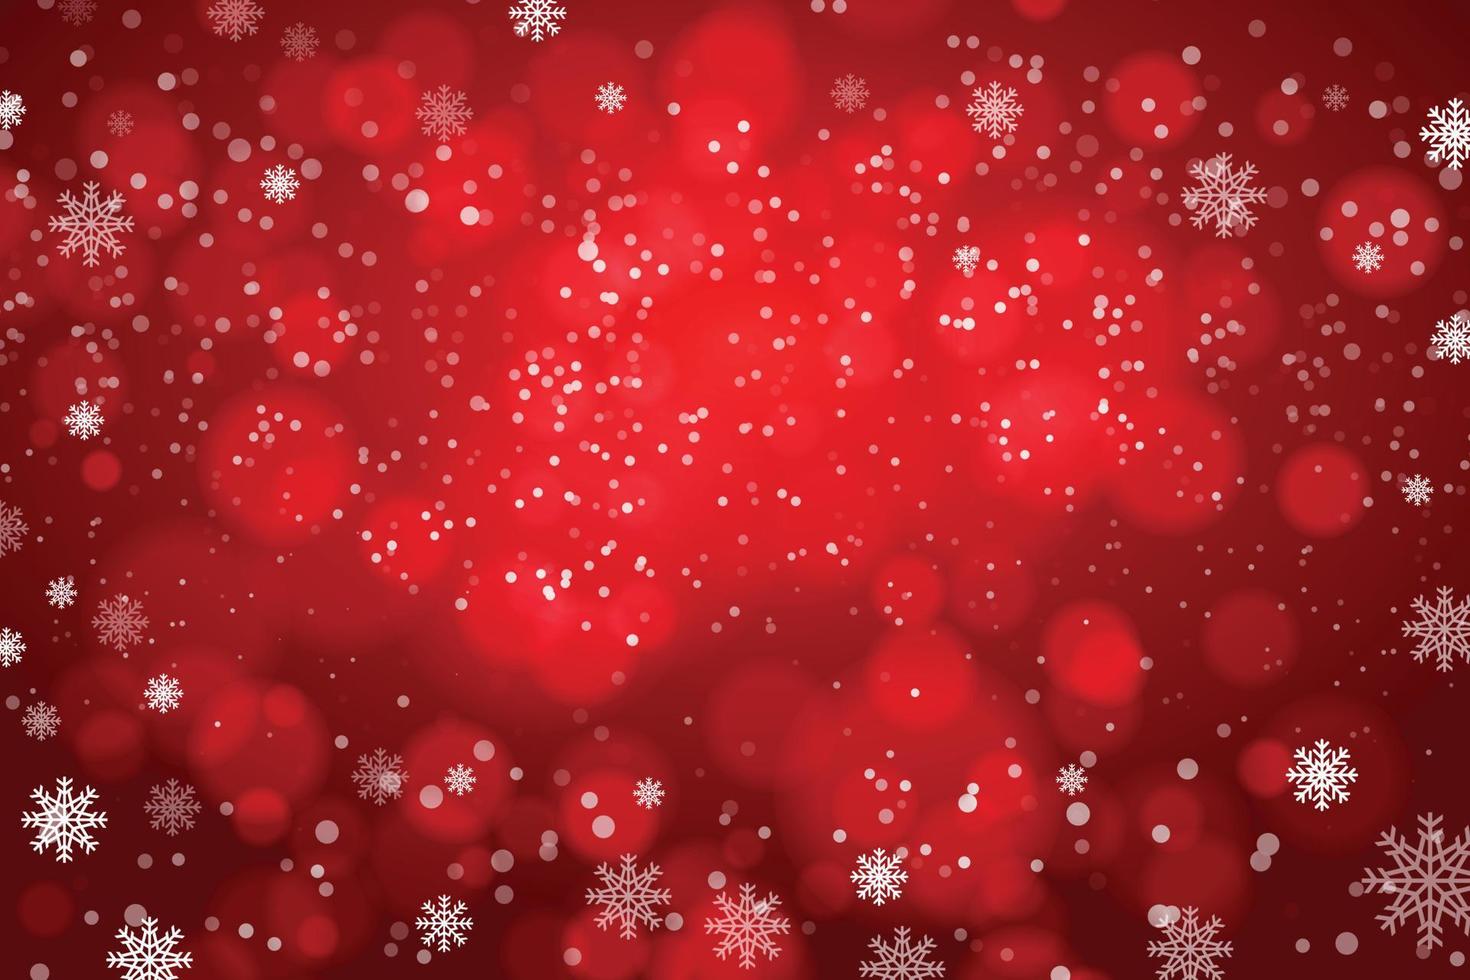 Snowflakes and snowfall on a cold red winter background. vector